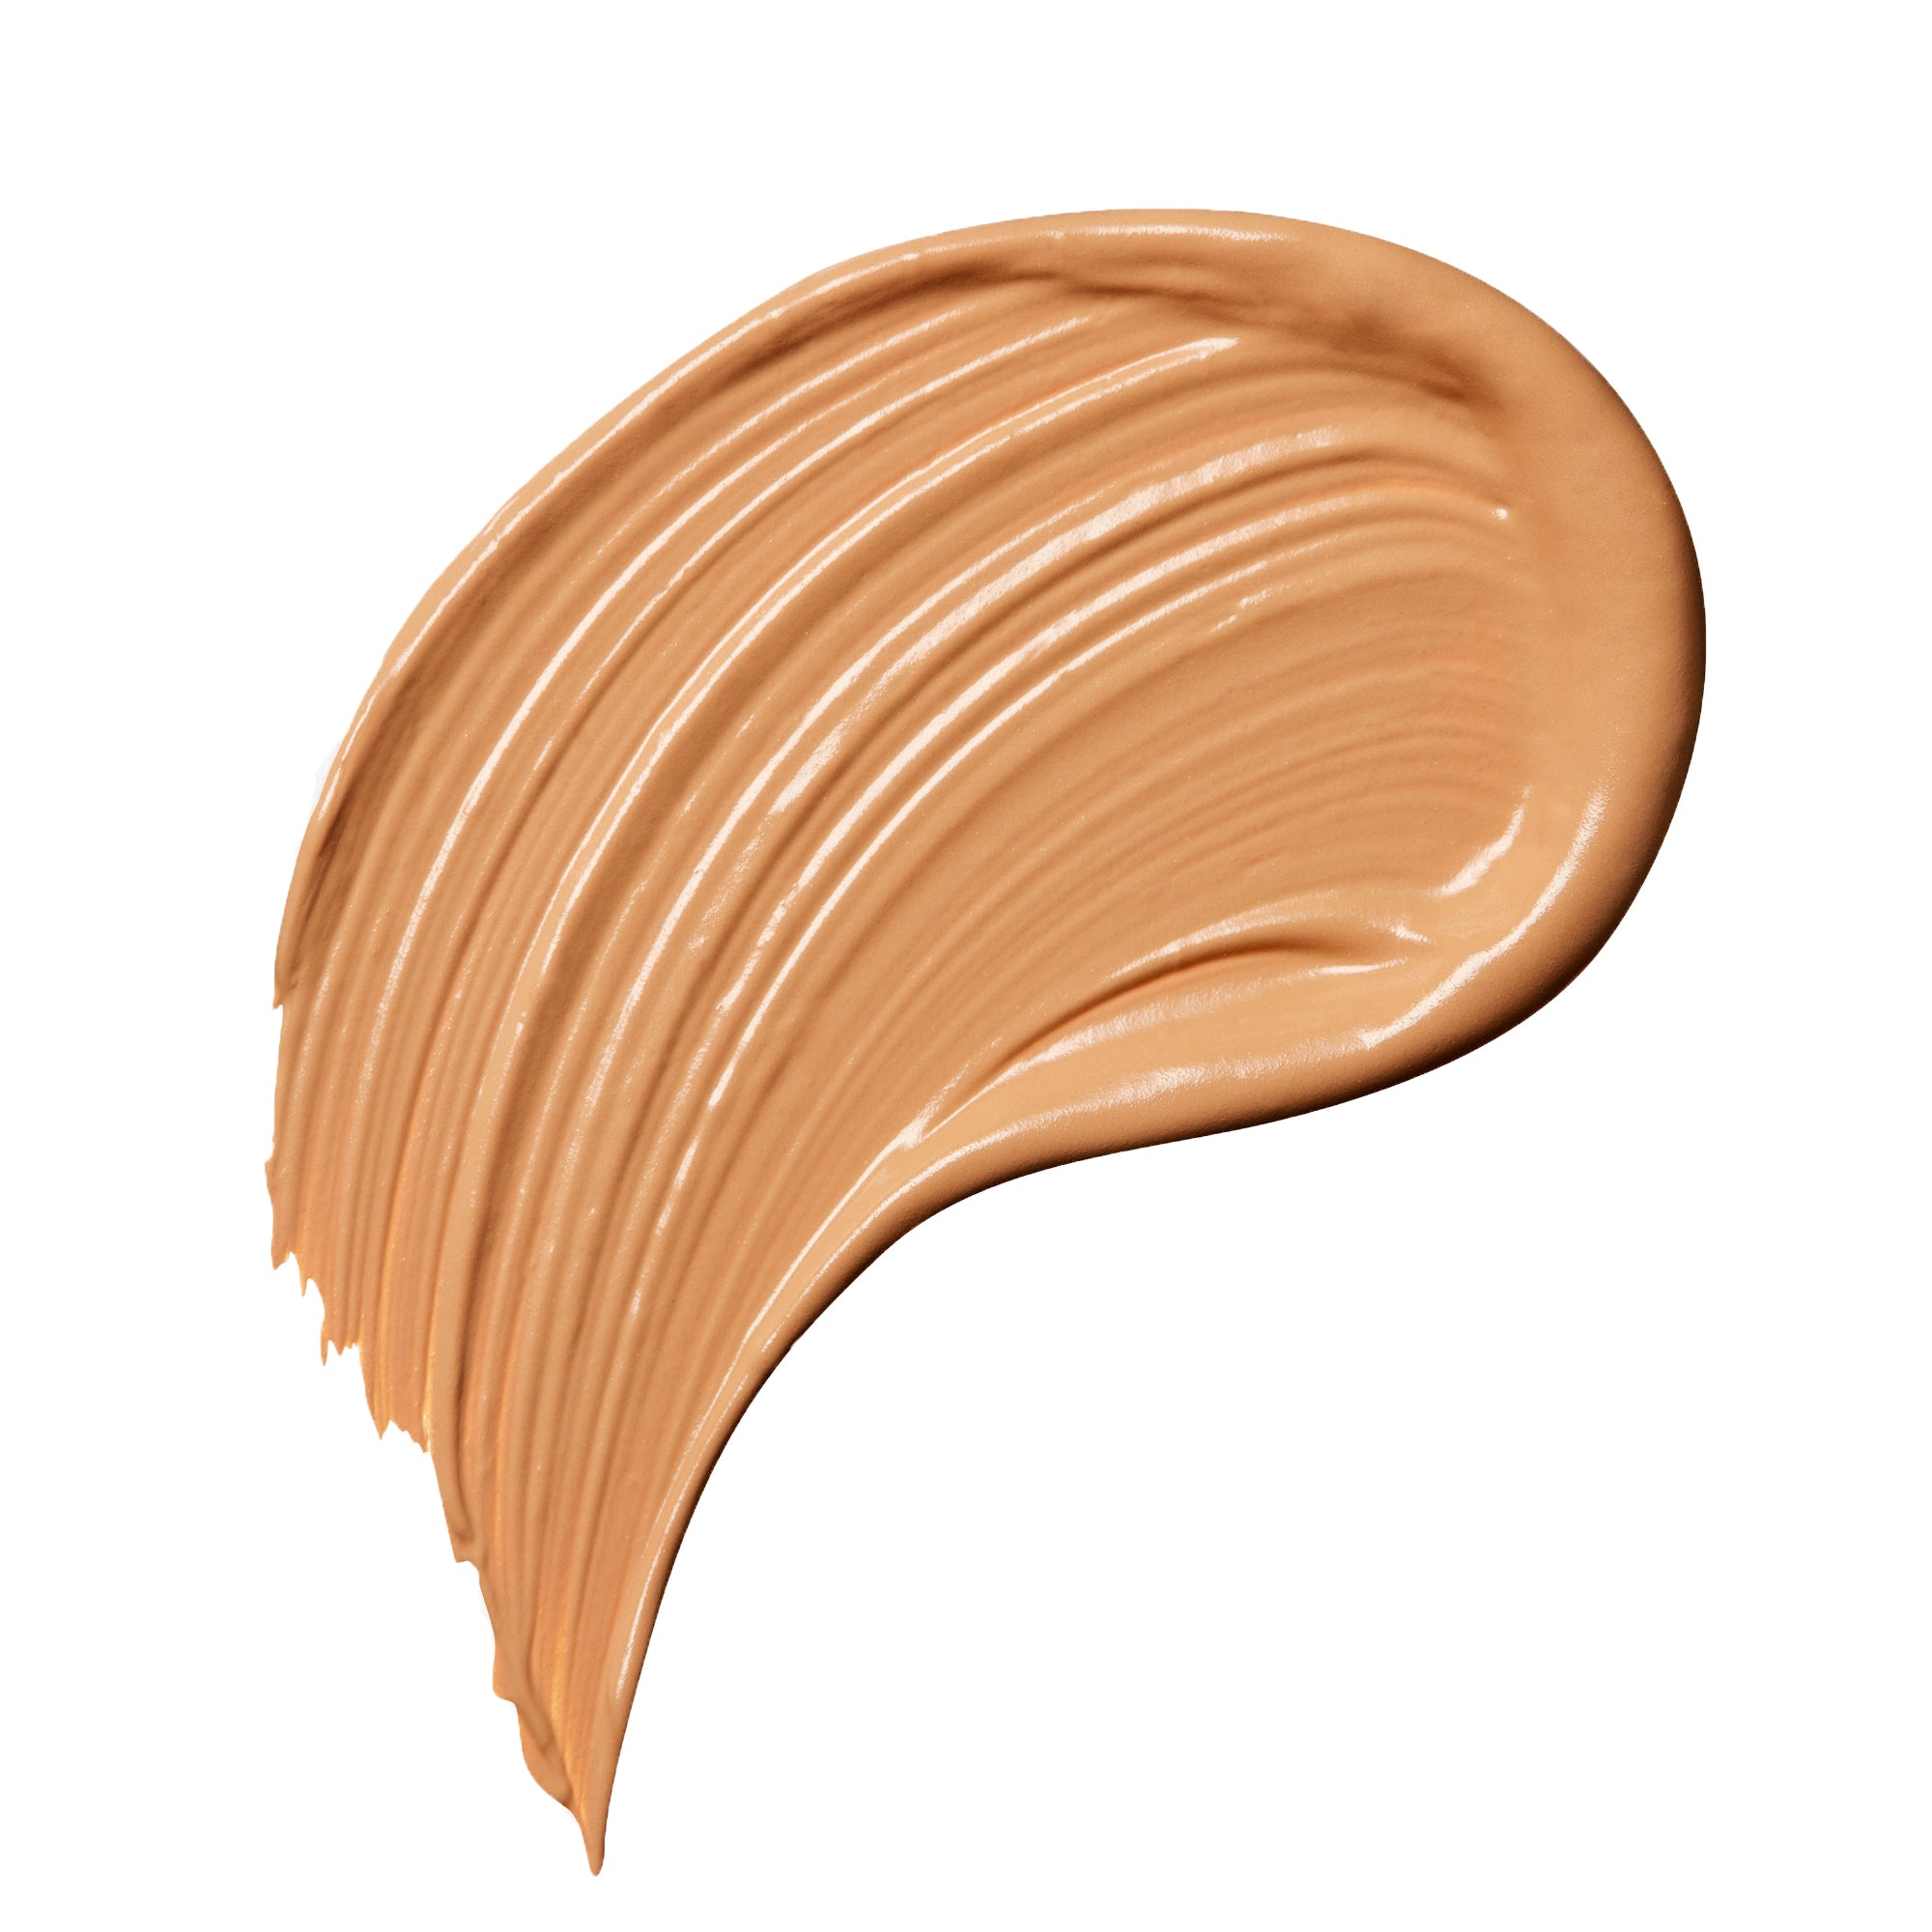 Rodial Glass Concealer / Shade 03